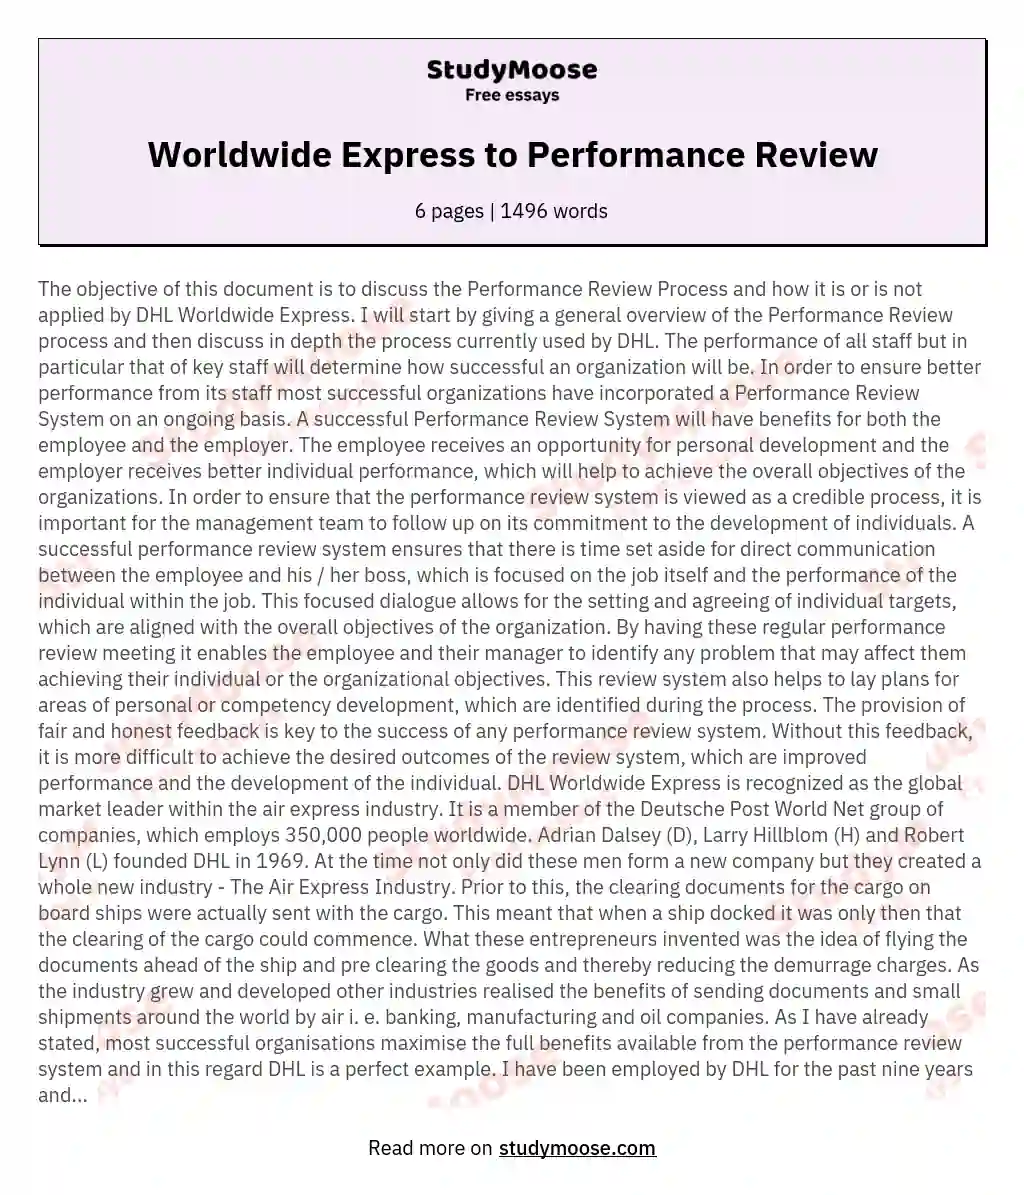 Worldwide Express to Performance Review essay